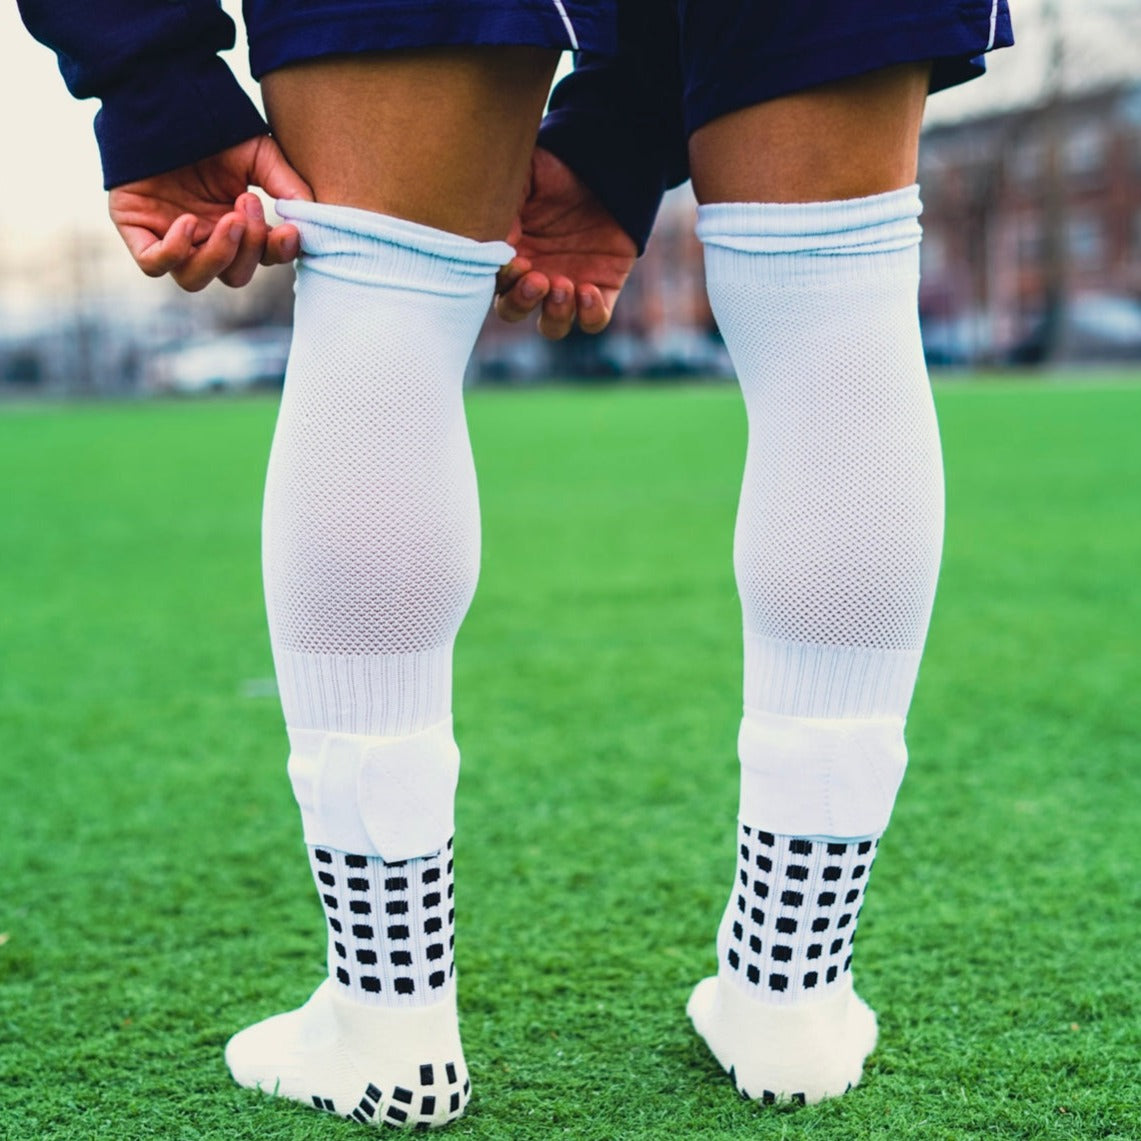 Why do many footballers wear their socks up above their knees? - Quora